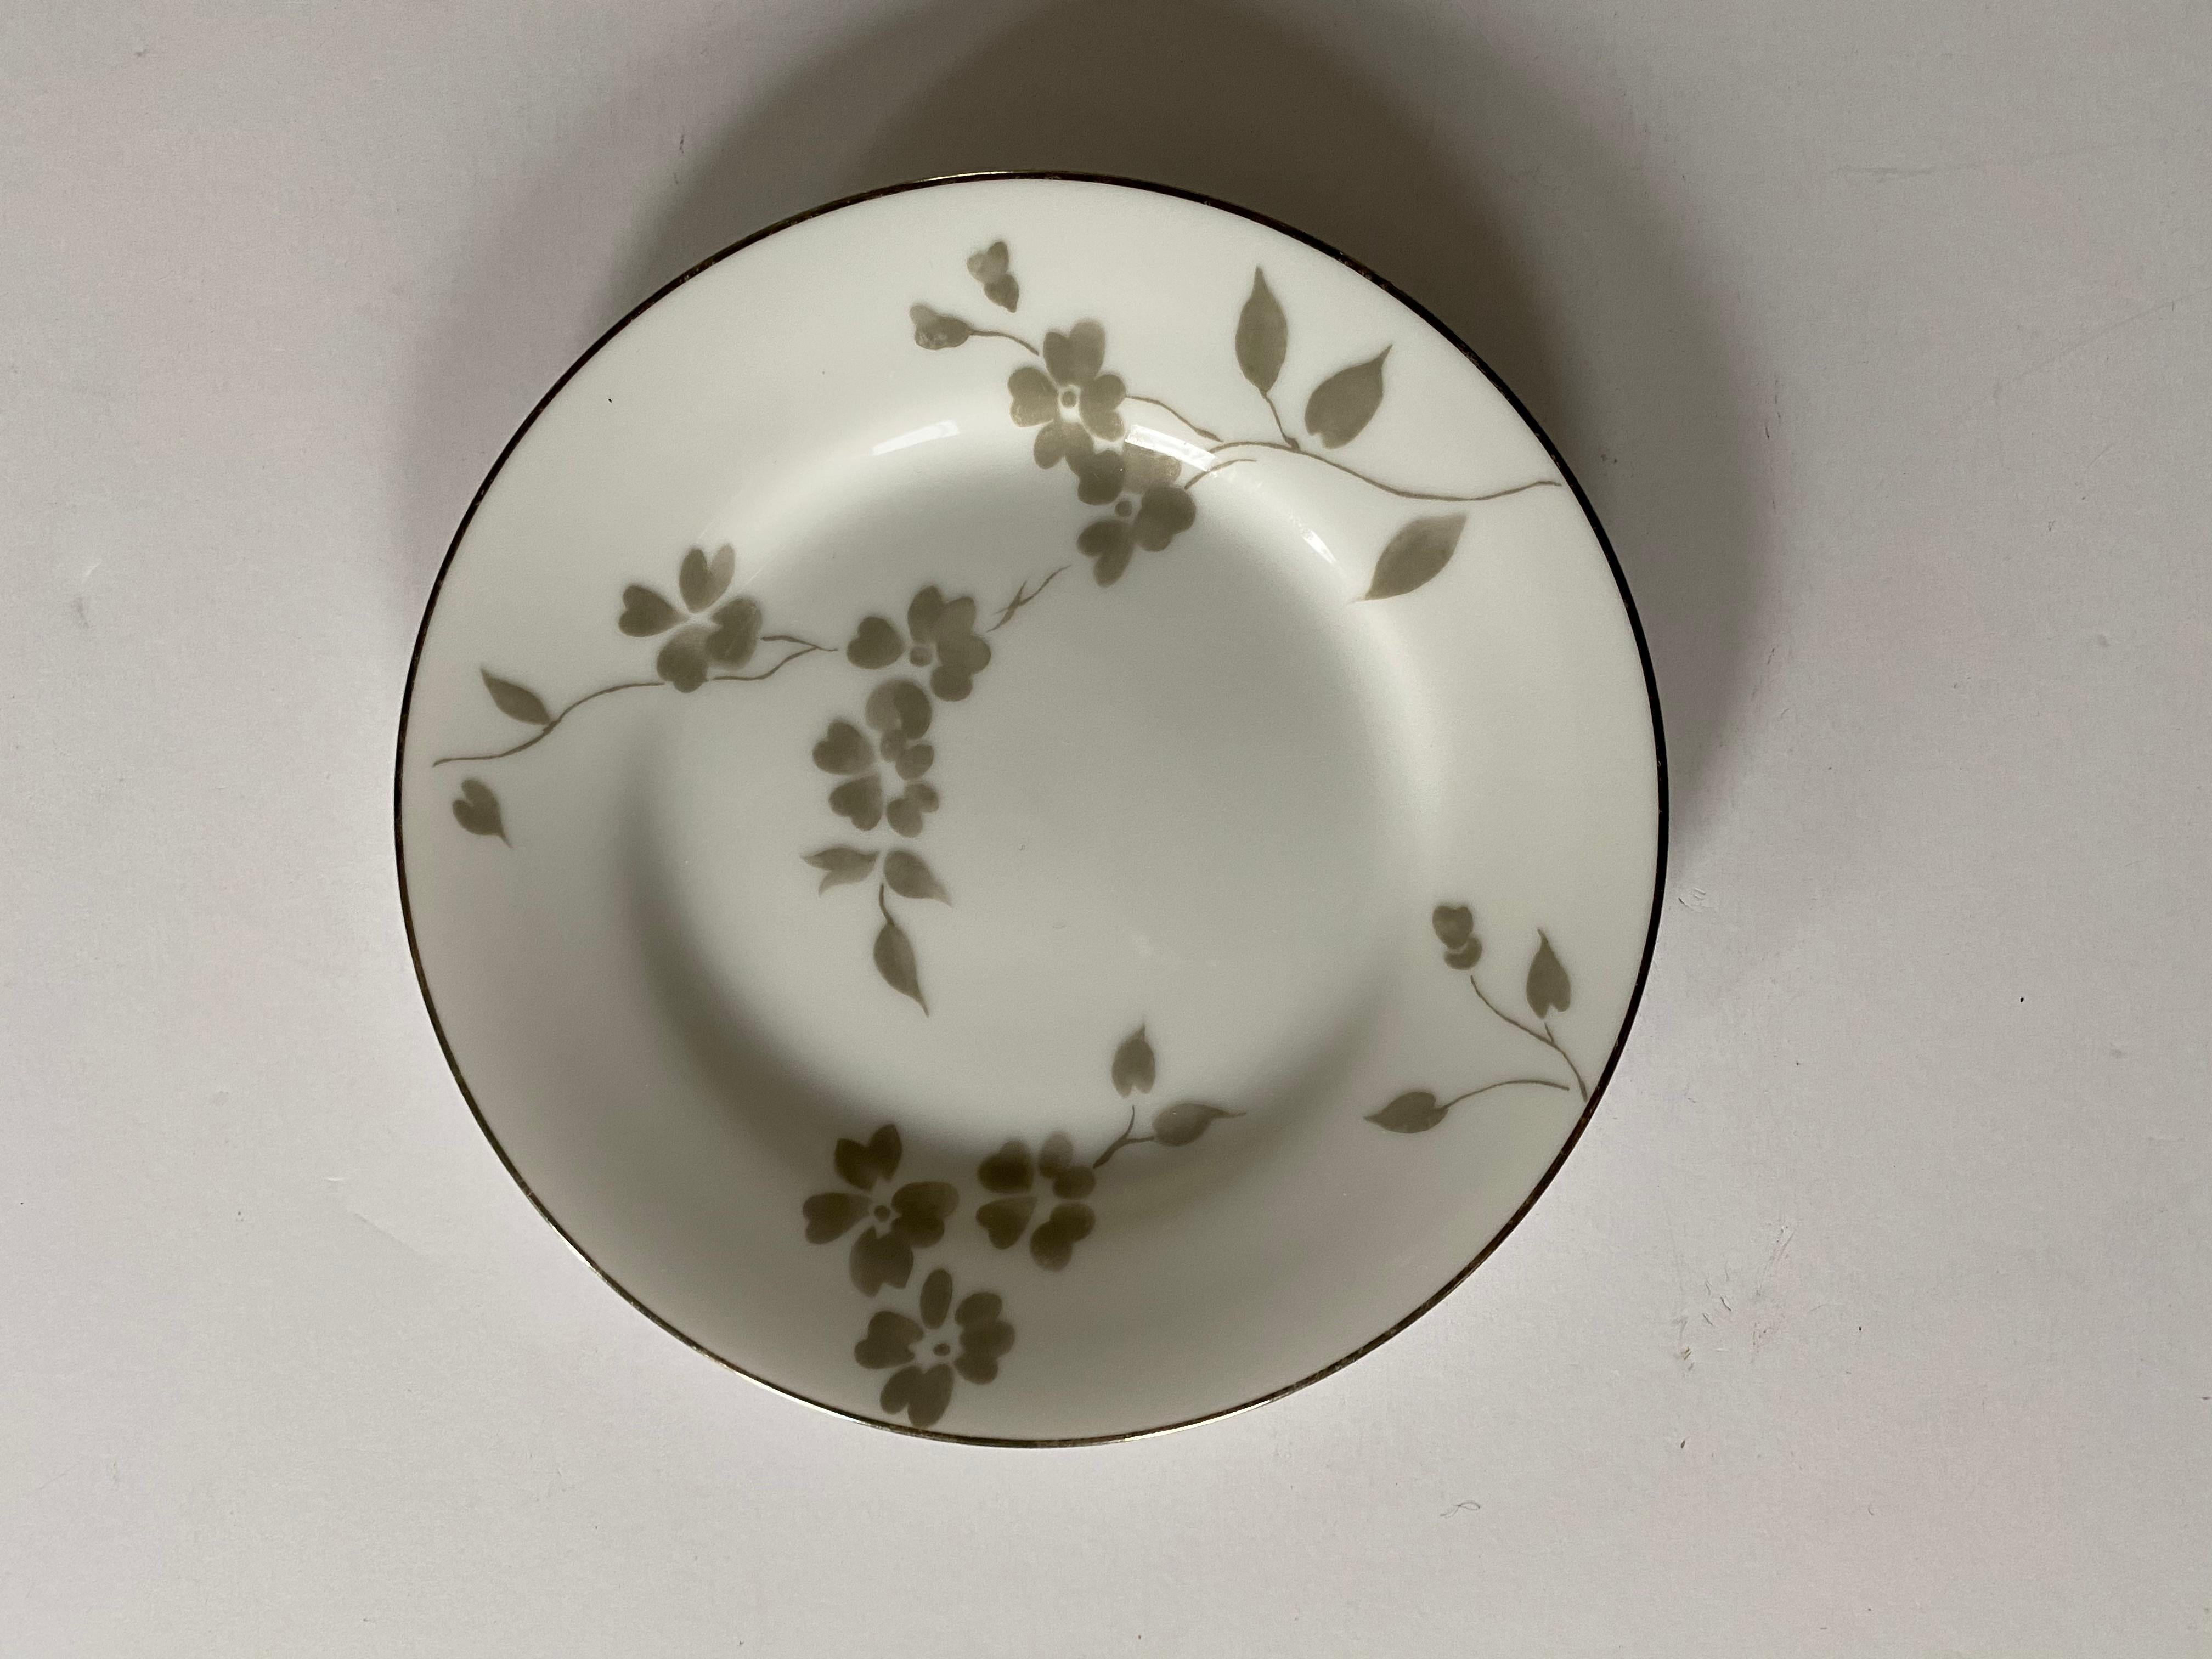 Ralph Lauren Home Sophia Dinnerware, 4 Place Settings In Good Condition For Sale In New York, NY